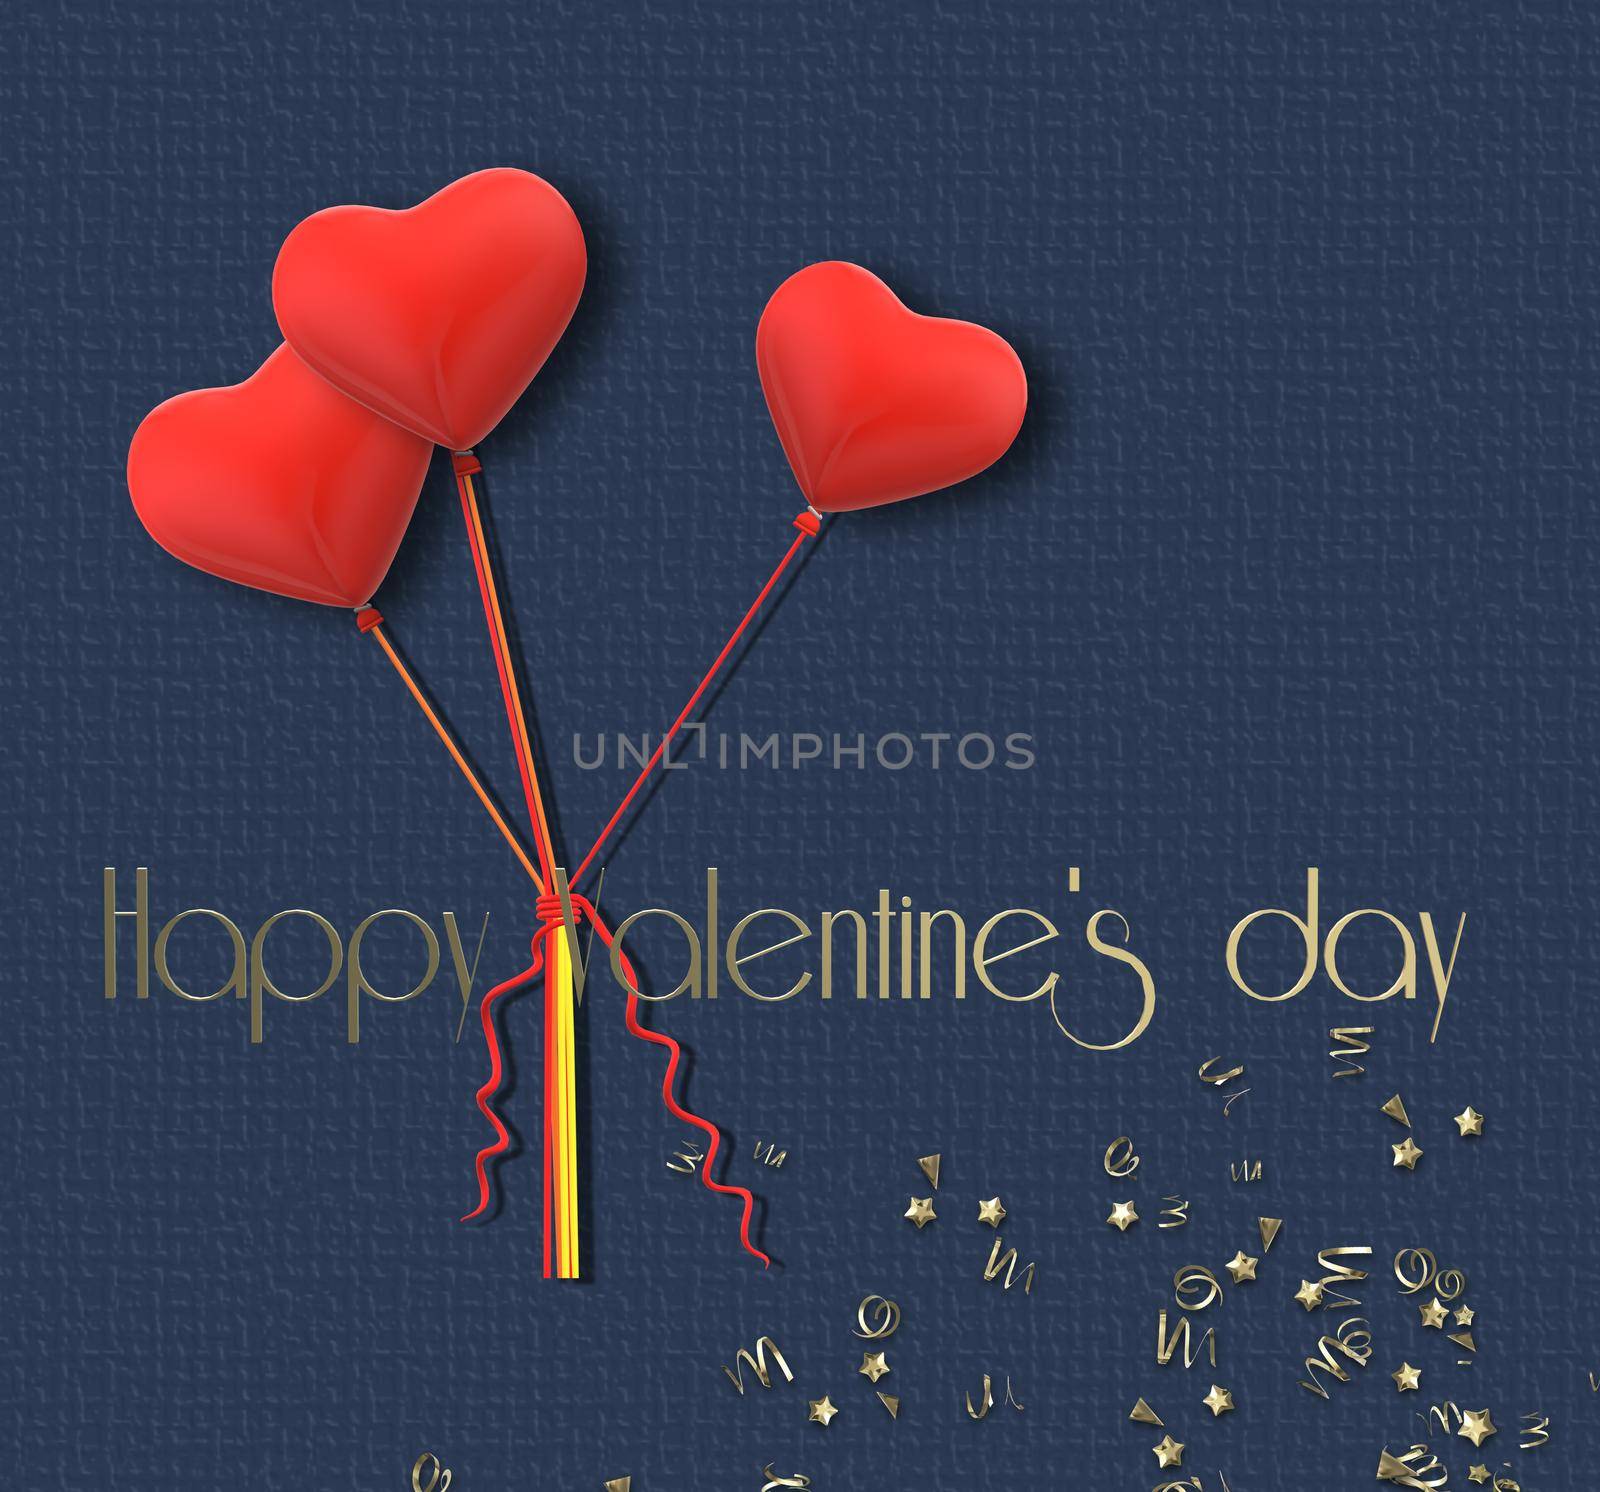 Valentines day background with Heart Shaped red Balloons Gold text Happy Valentine's day. 3D illustration